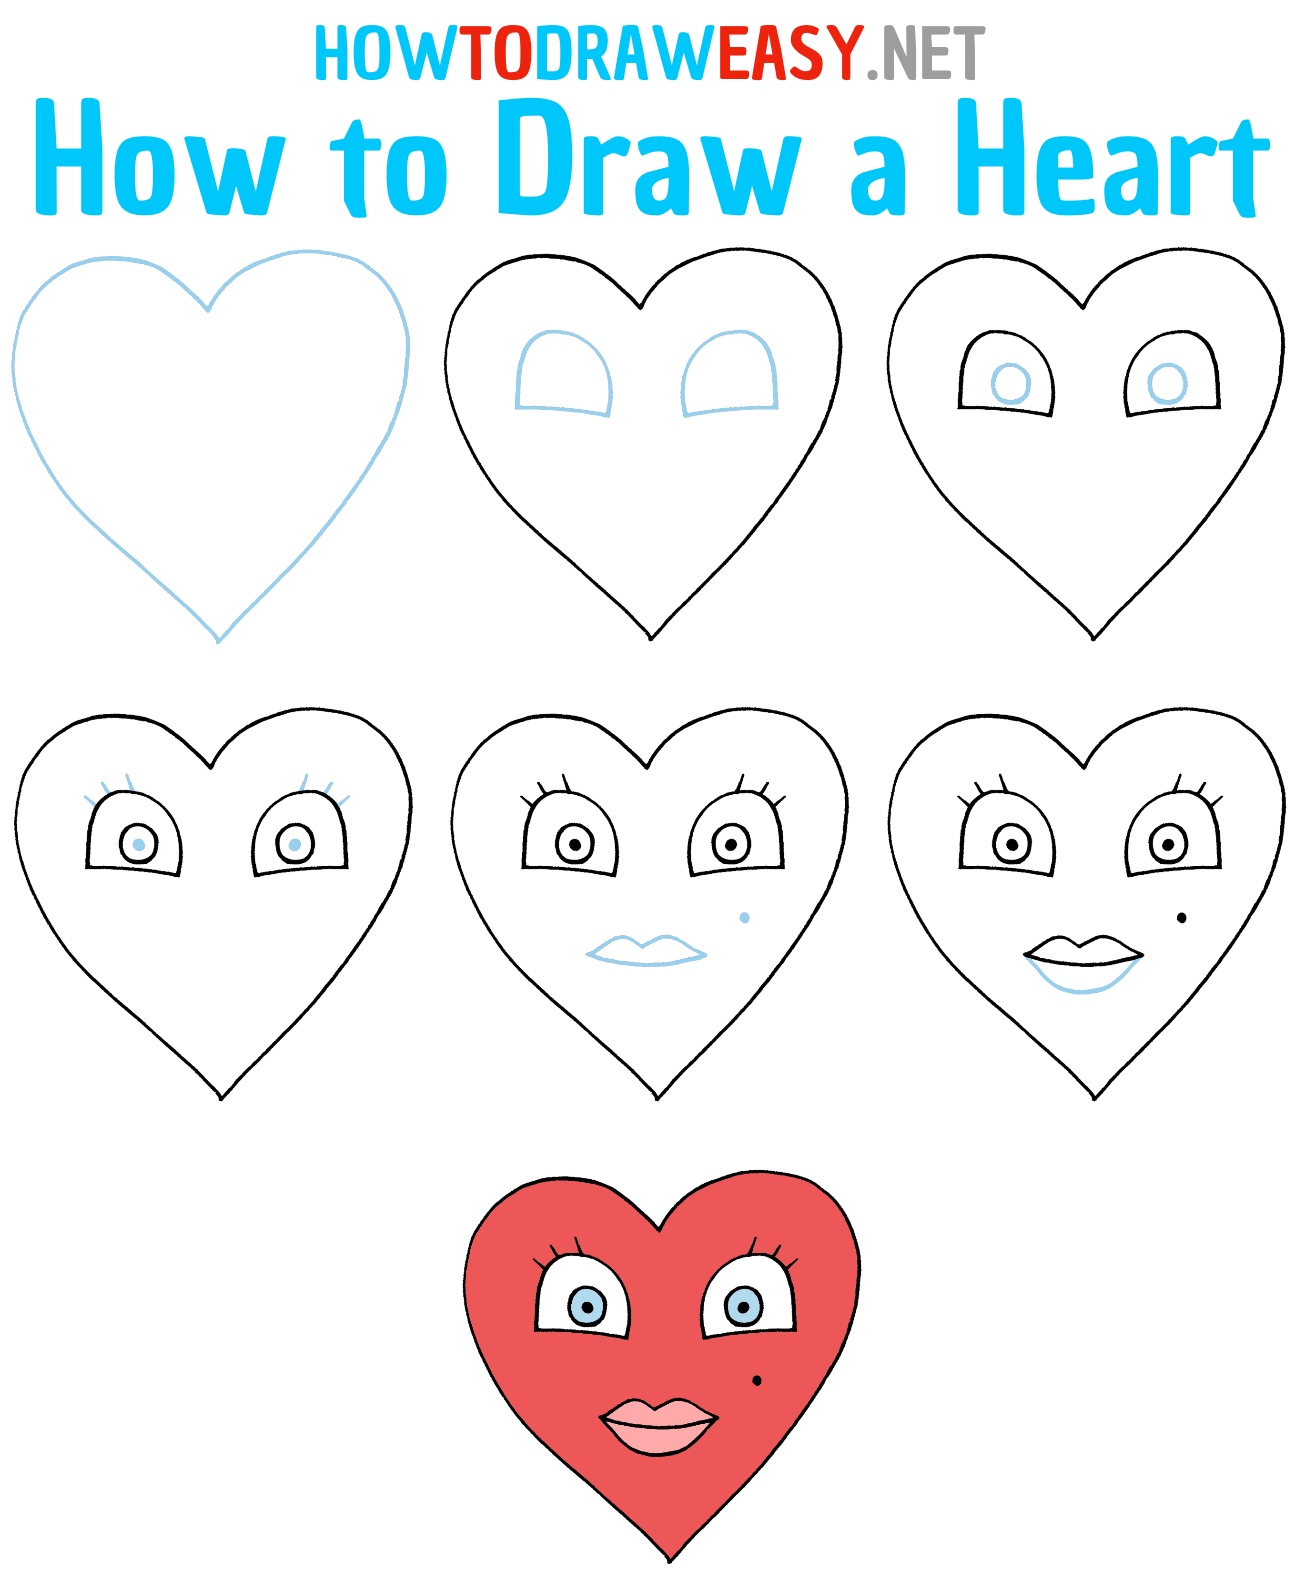 How to Draw a Heart Step by Step